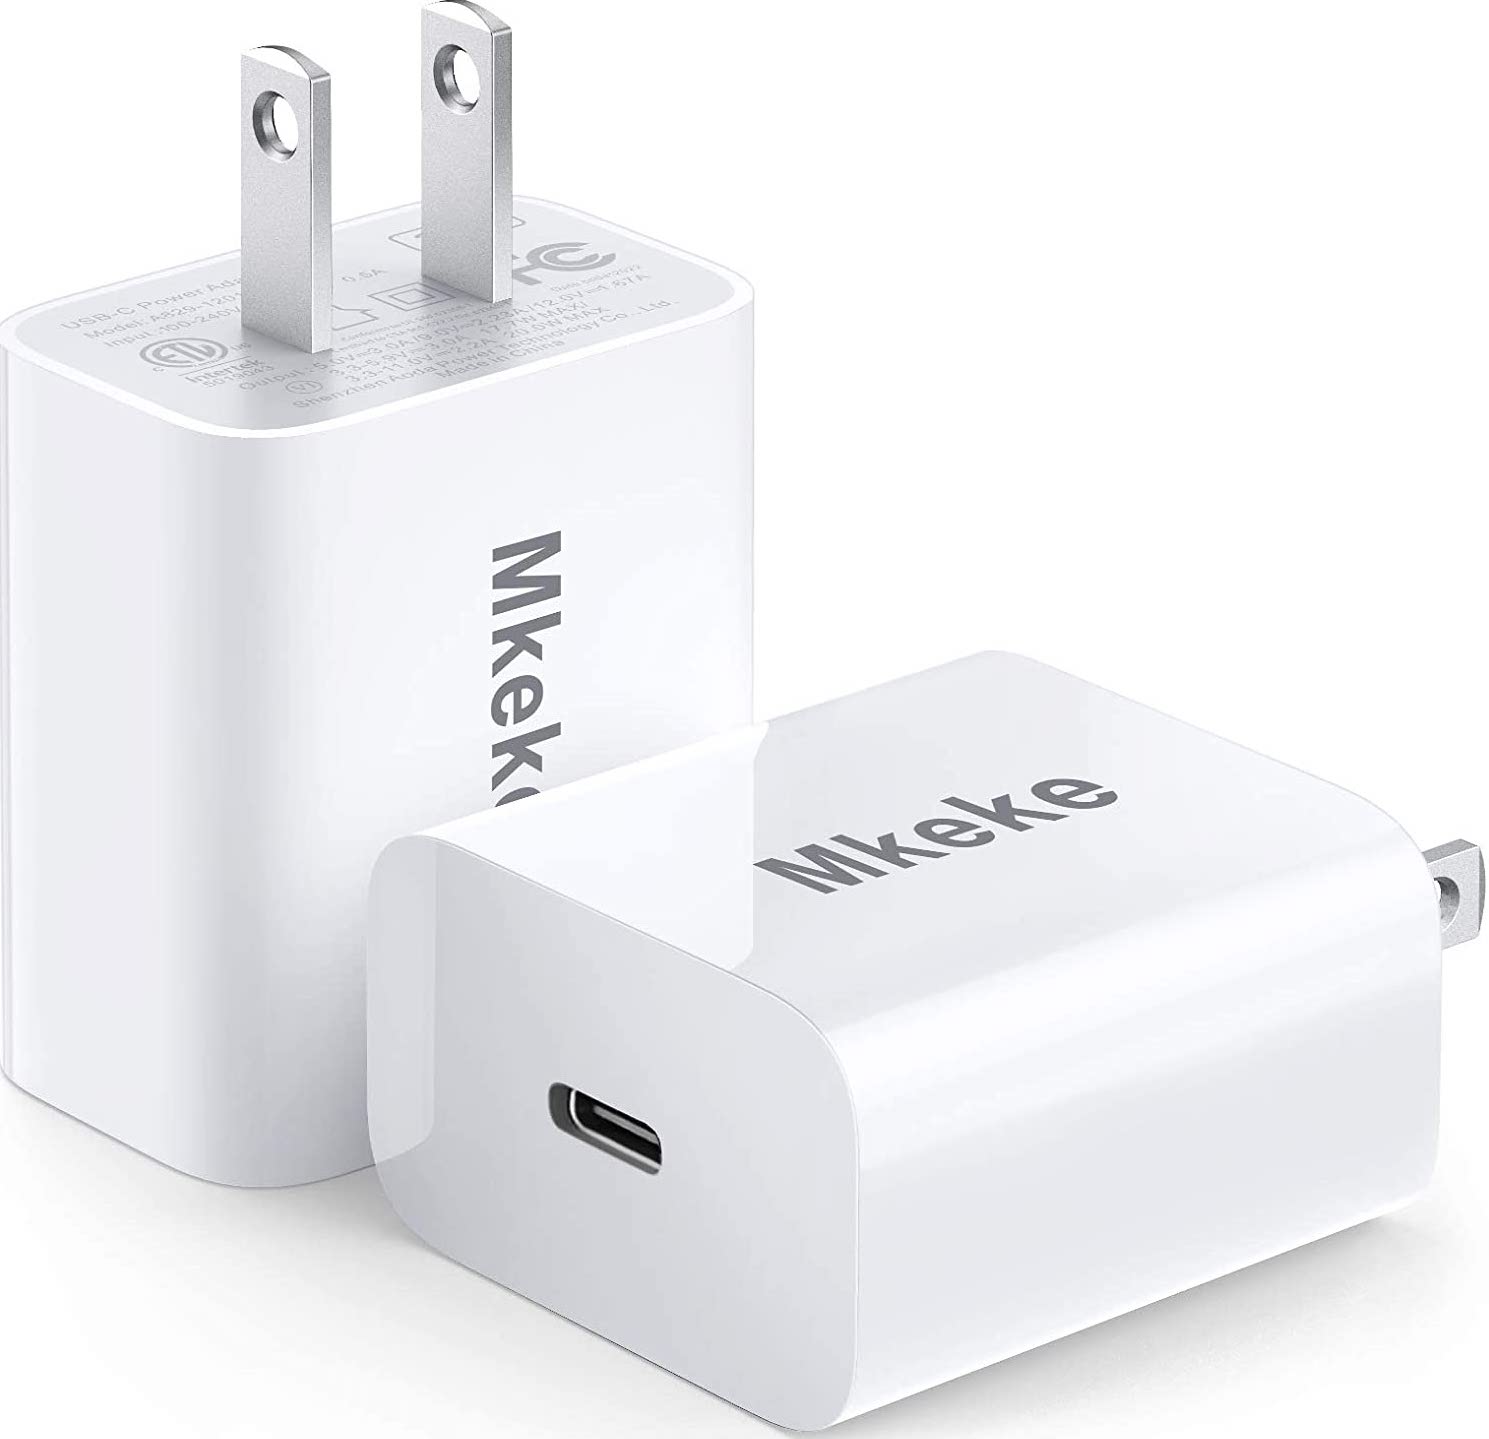 Mkeke Iphone Wall Adapter Render Cropped